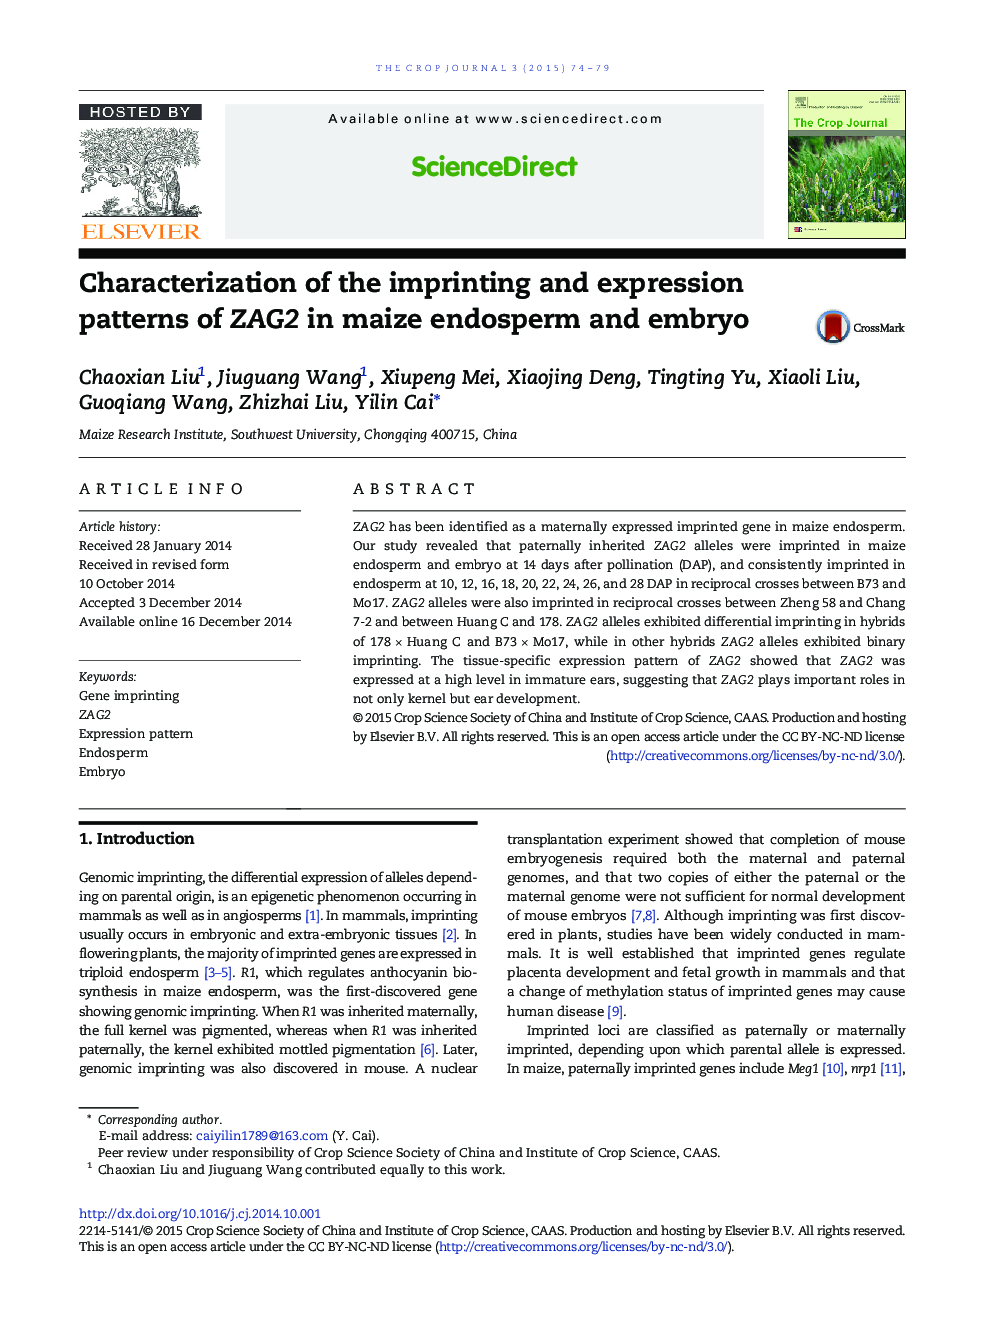 Characterization of the imprinting and expression patterns of ZAG2 in maize endosperm and embryo